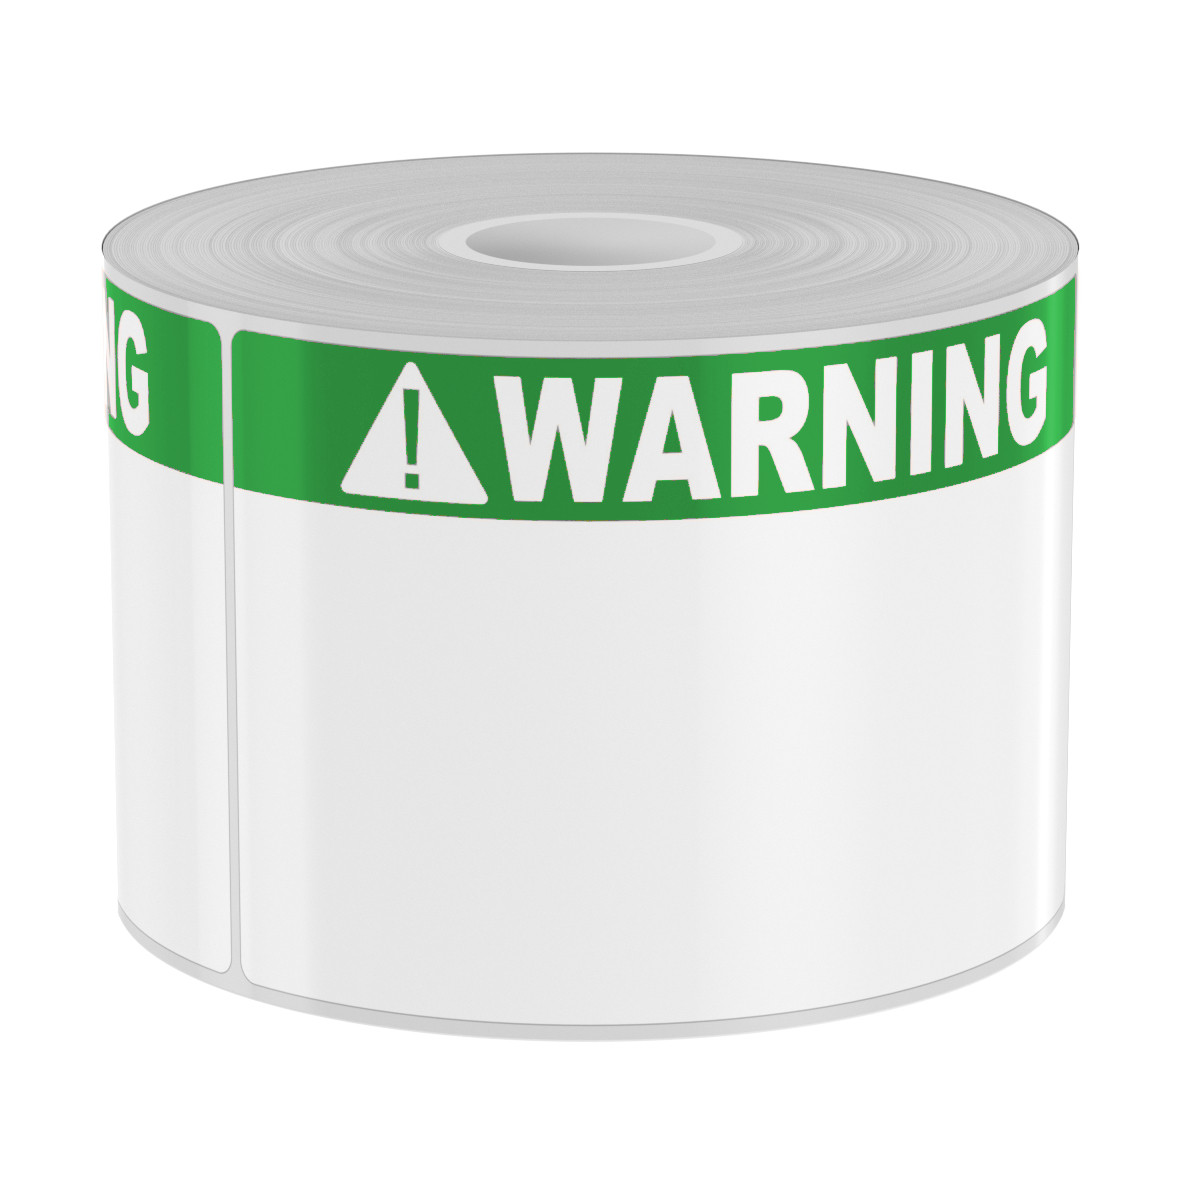 Ask a question about 250 3" x 5" High-Performance Die-Cut Green Band White Warning